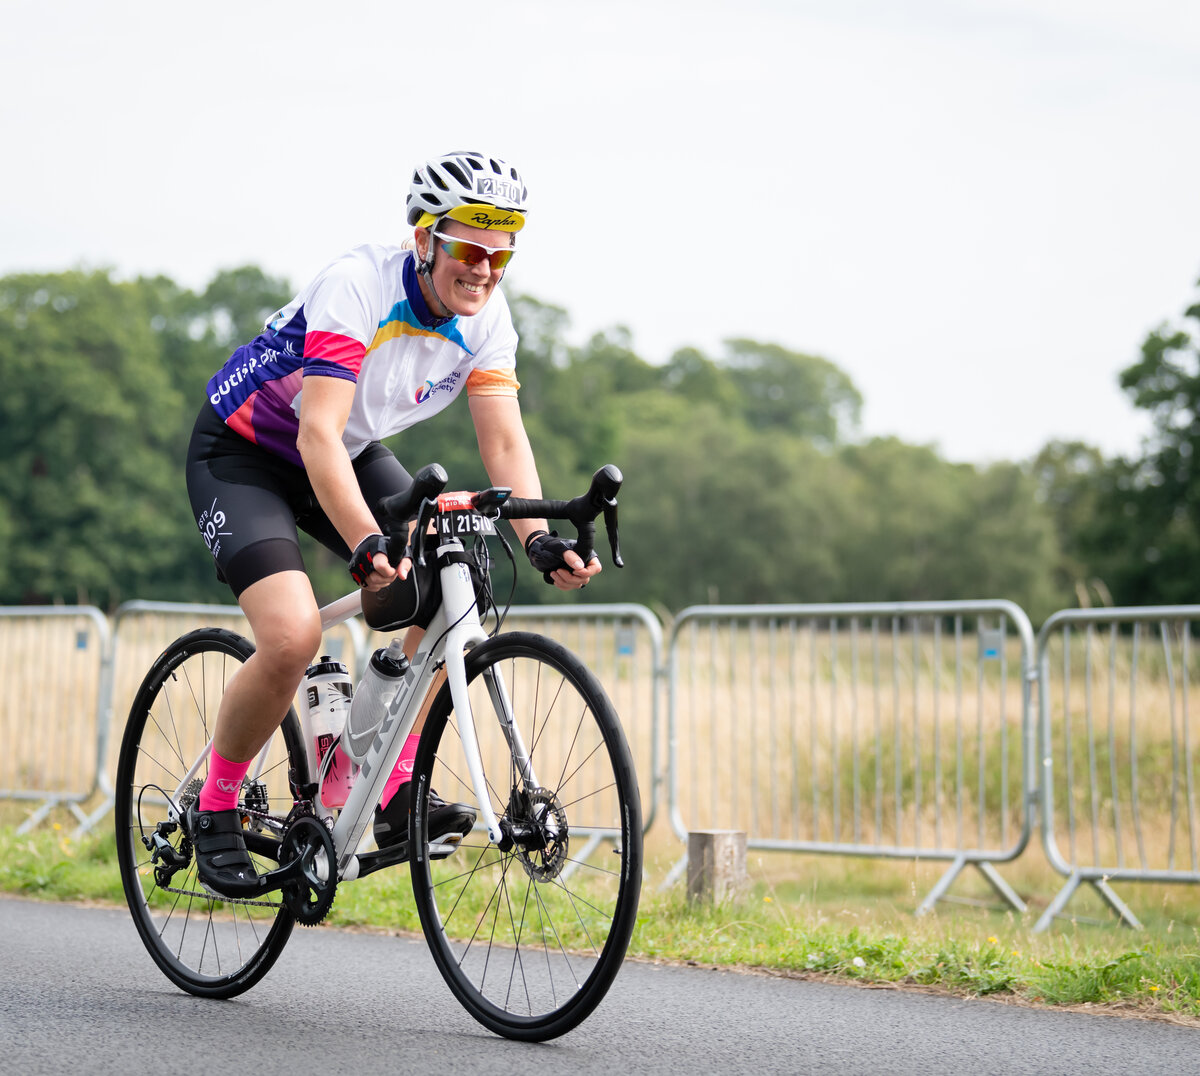 Cyclists take part in Prudential RideLondon 100 to raise money for The National Autistic Society. // Photography by www.sportsphotographer.co.uk